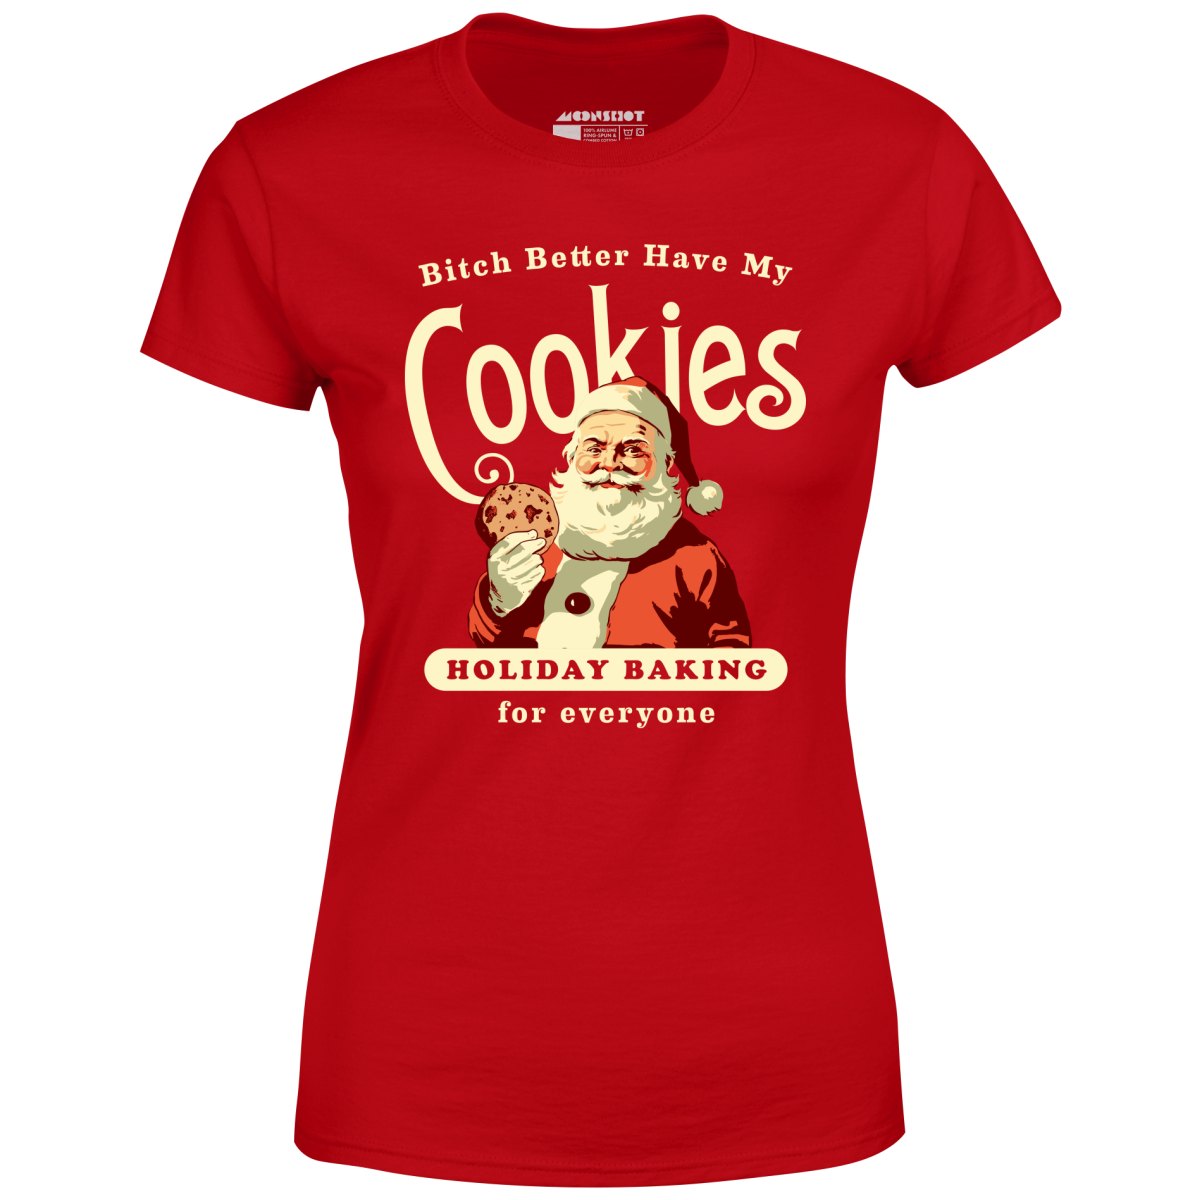 Bitch Better Have My Cookies Holiday Baking - Women's T-Shirt